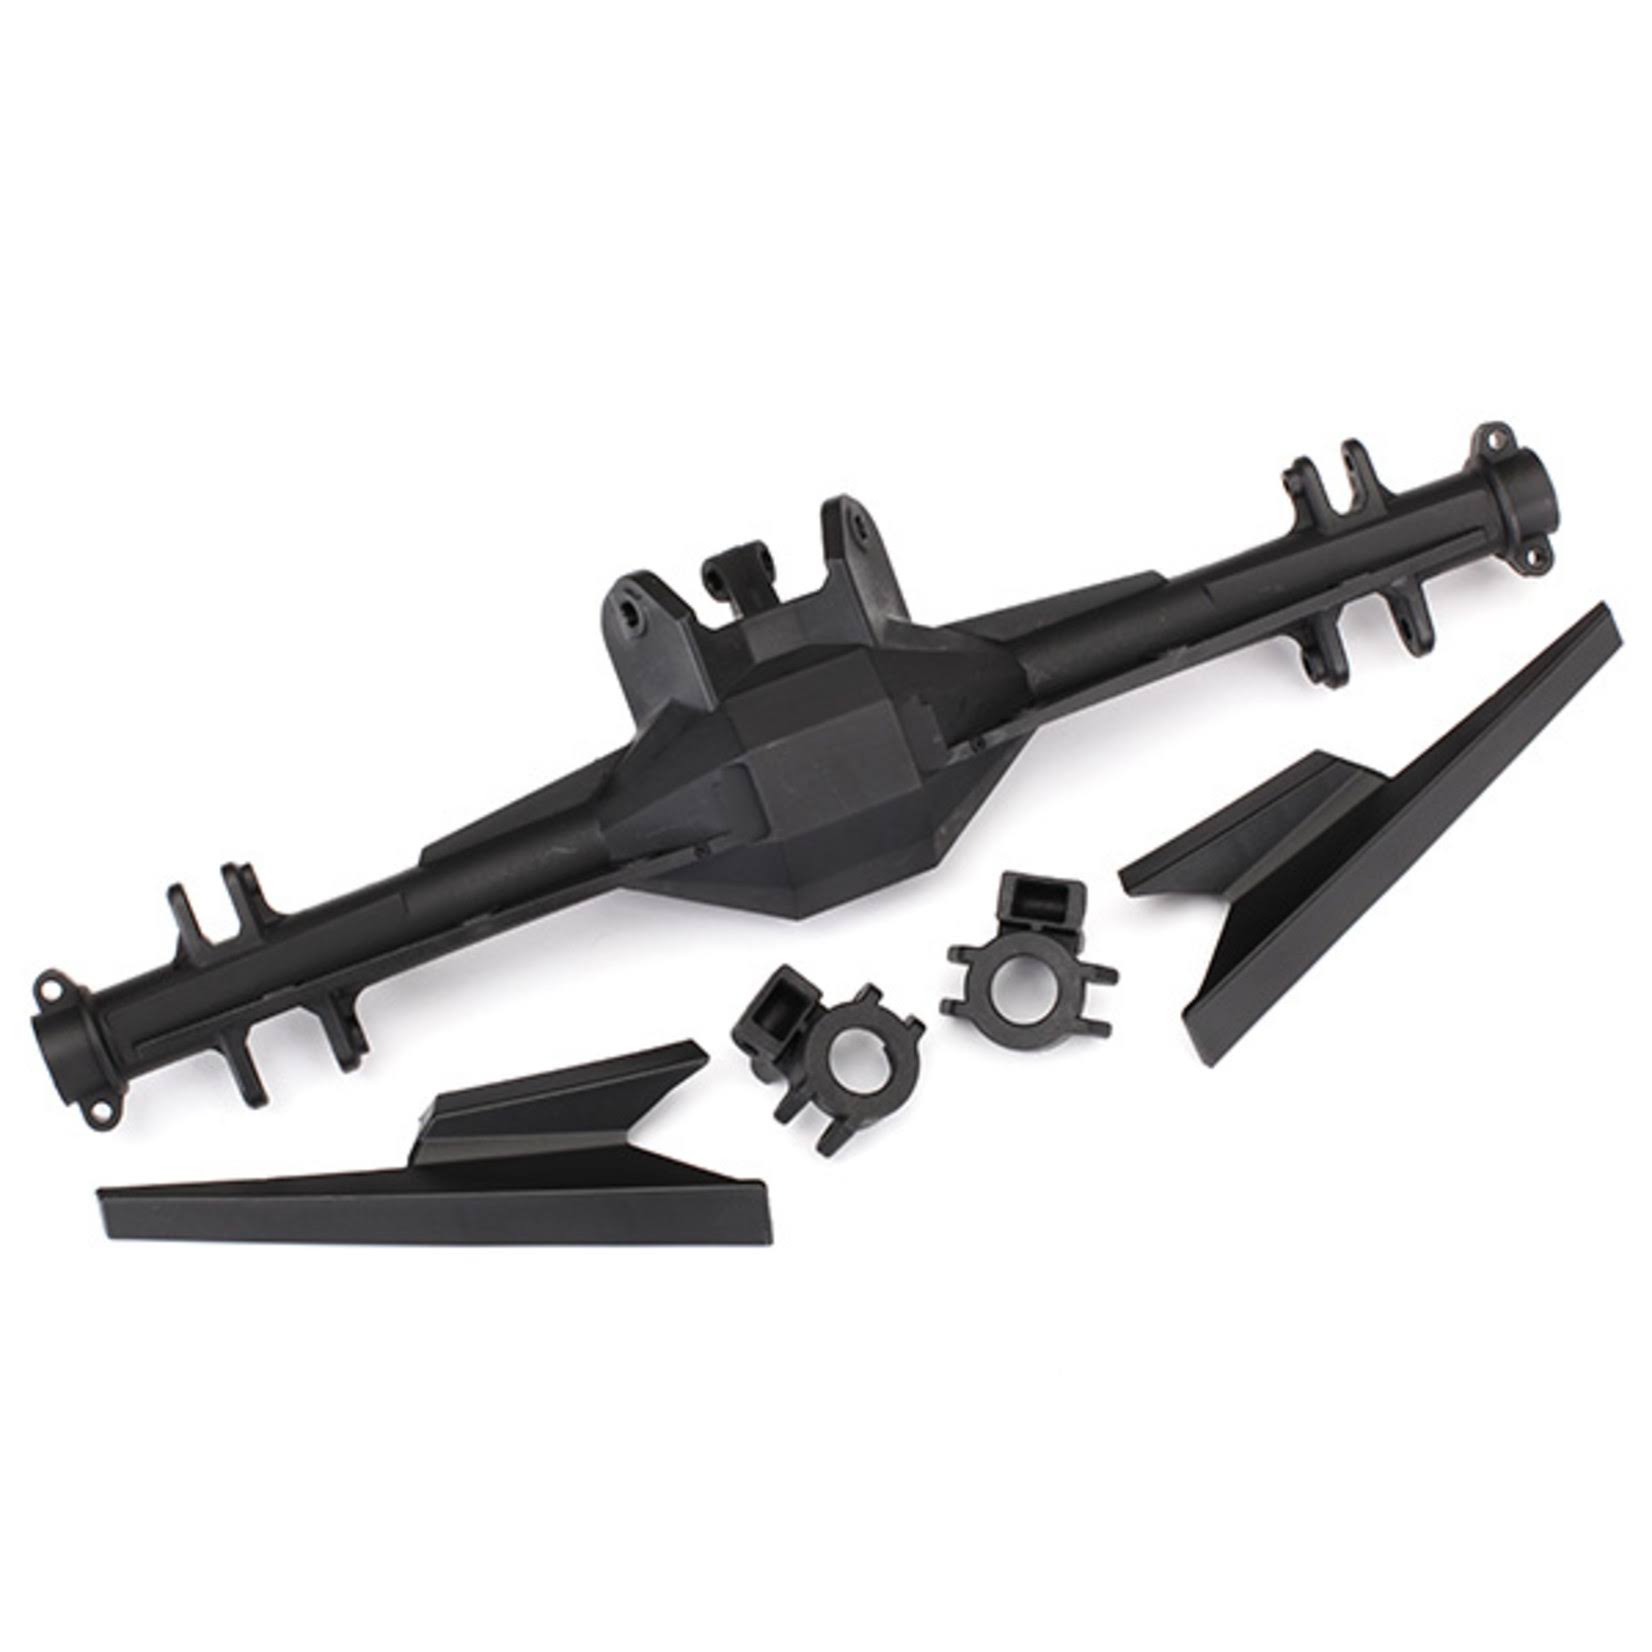 Traxxas UDR Axle Housing Rear and Axle Supports - Black